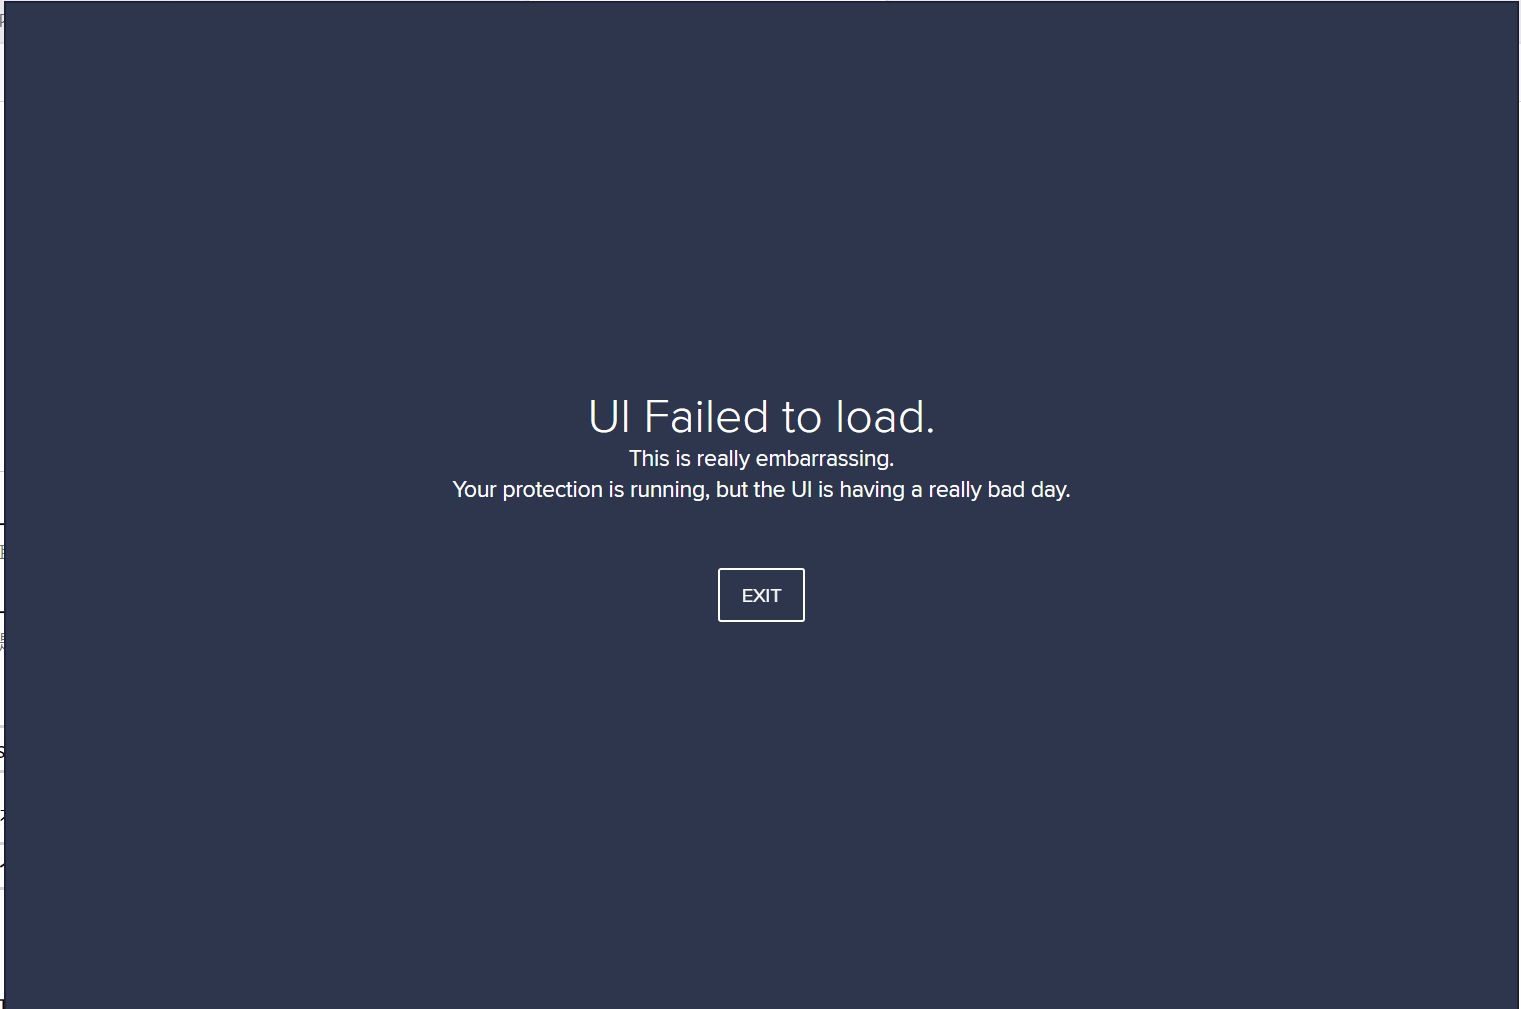 Failed to load game